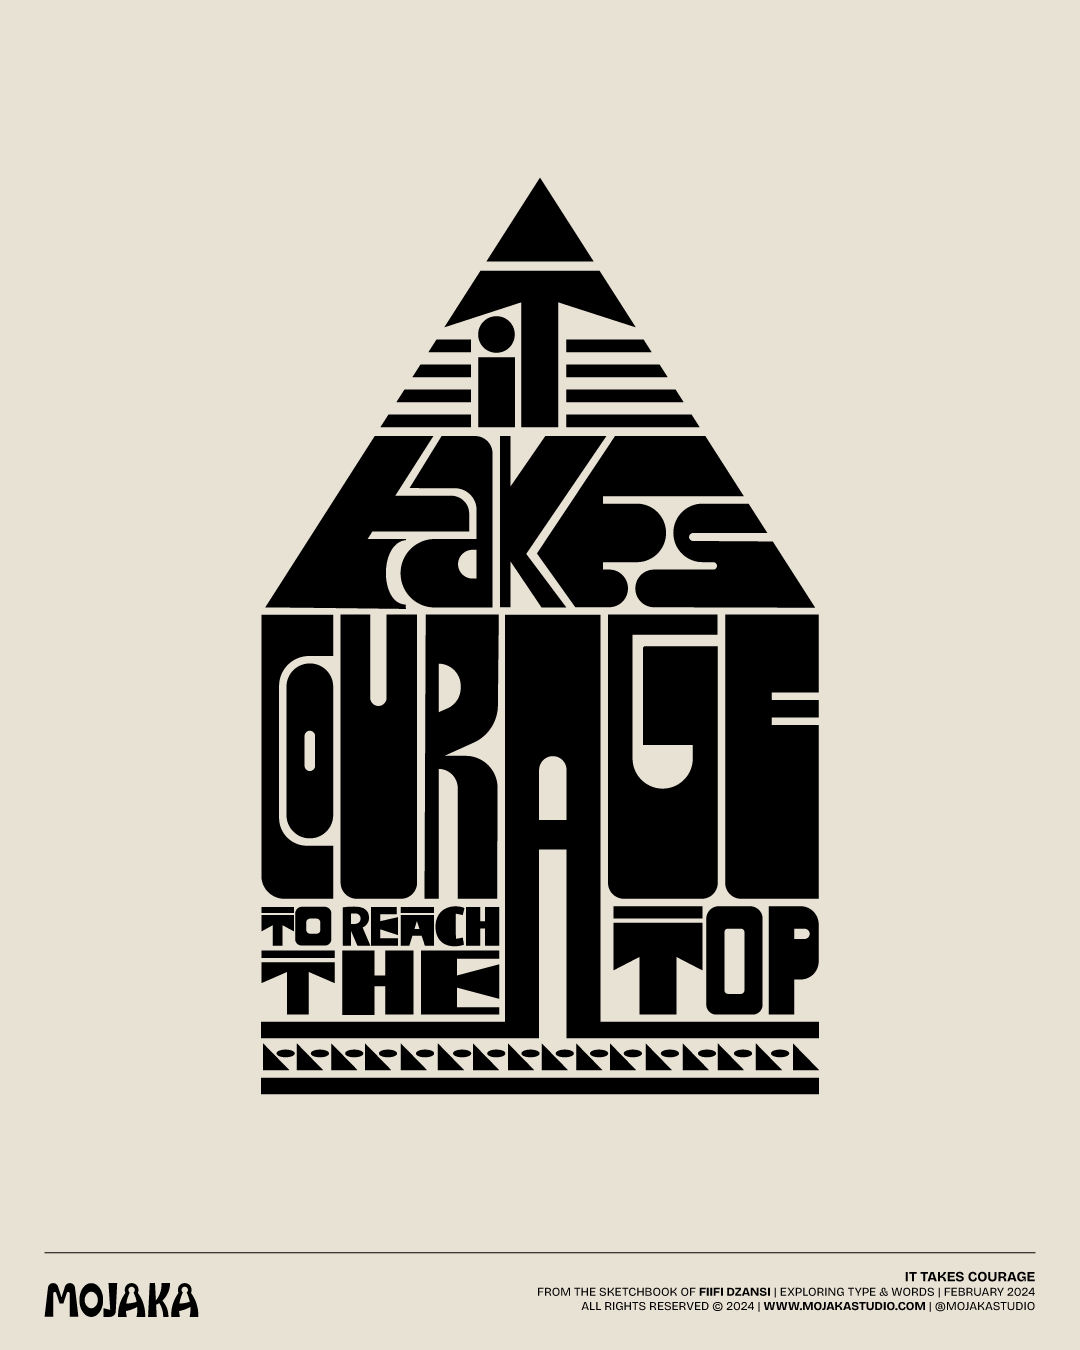 Typography design of 'It takes courage to reach the top.' Designed like a mountain.